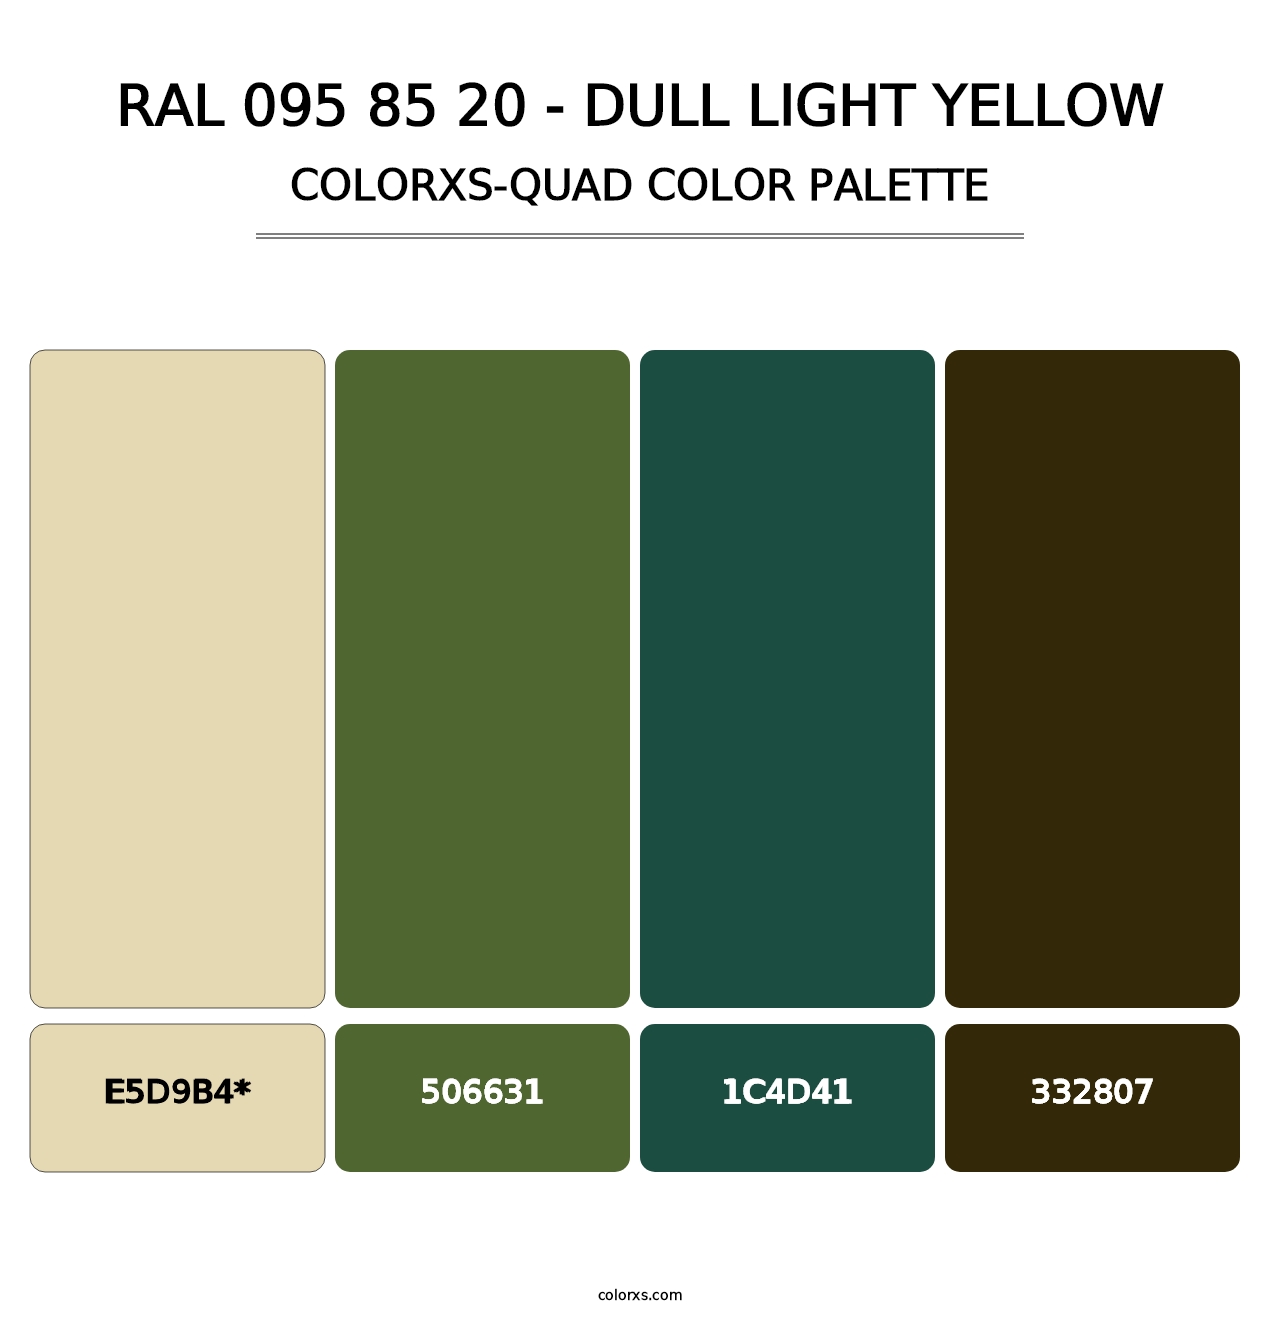 RAL 095 85 20 - Dull Light Yellow - Colorxs Quad Palette